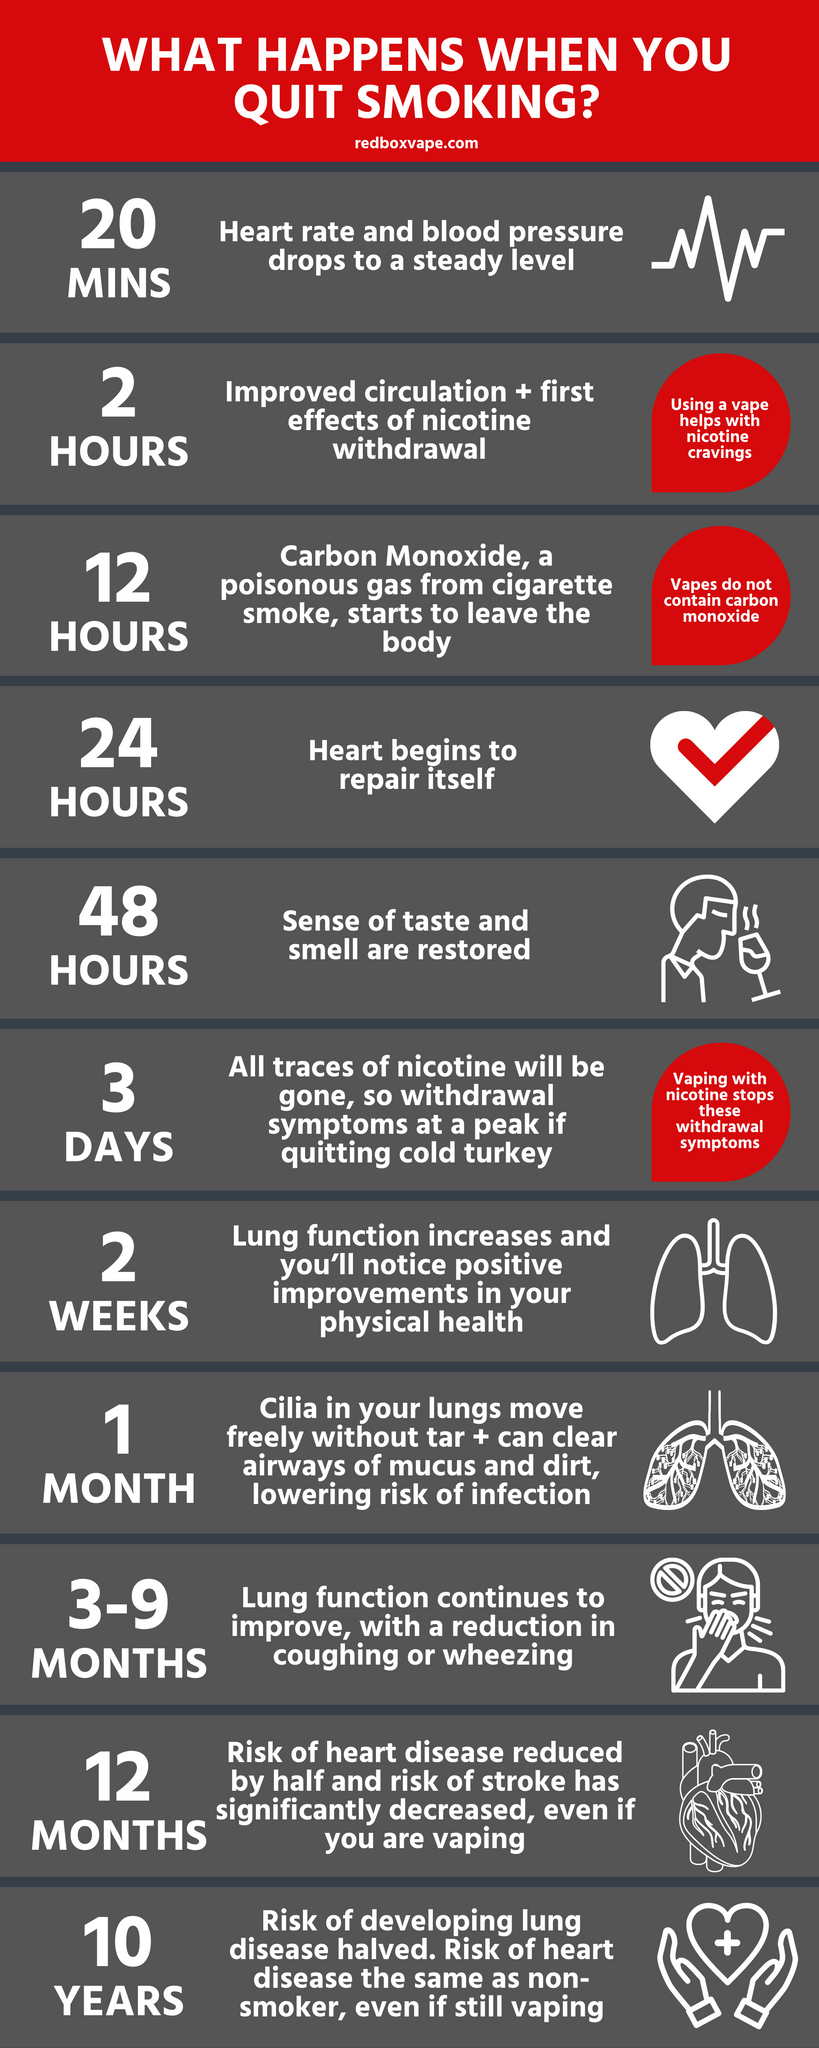 Quit Smoking Timeline: What Happens When You Stop Smoking (Benefits)